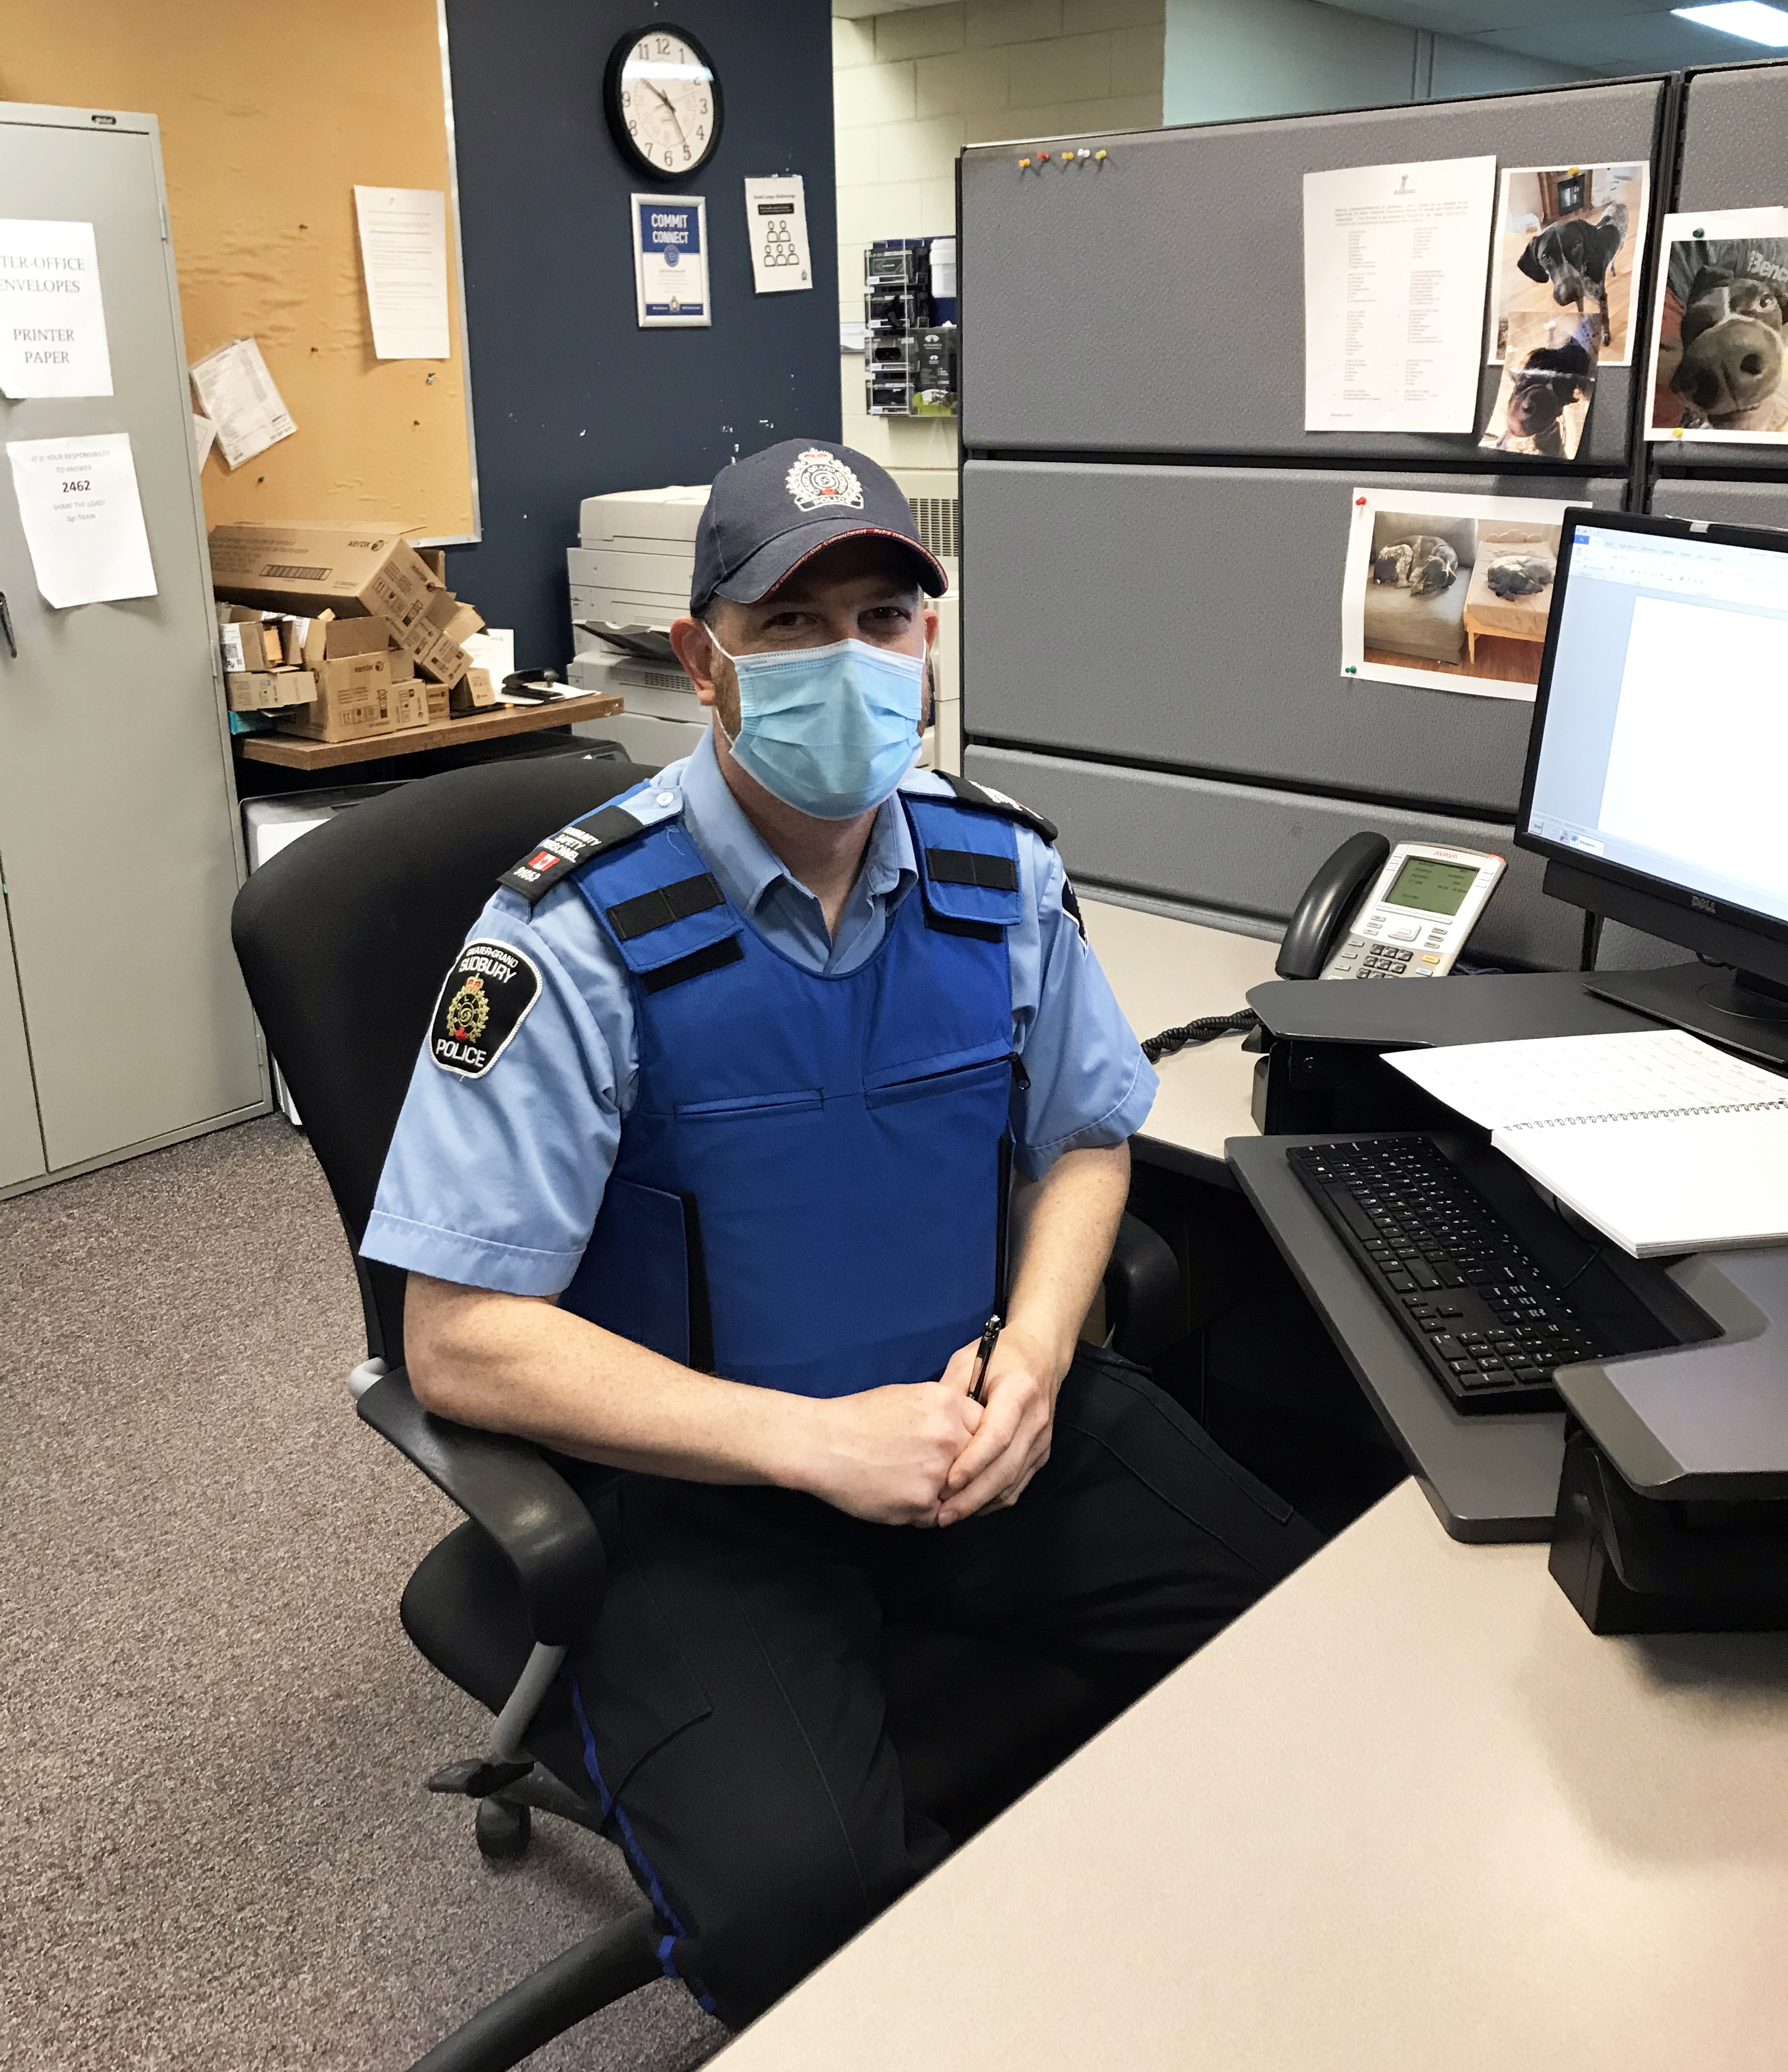 man in uniform sitting at desk with mask on